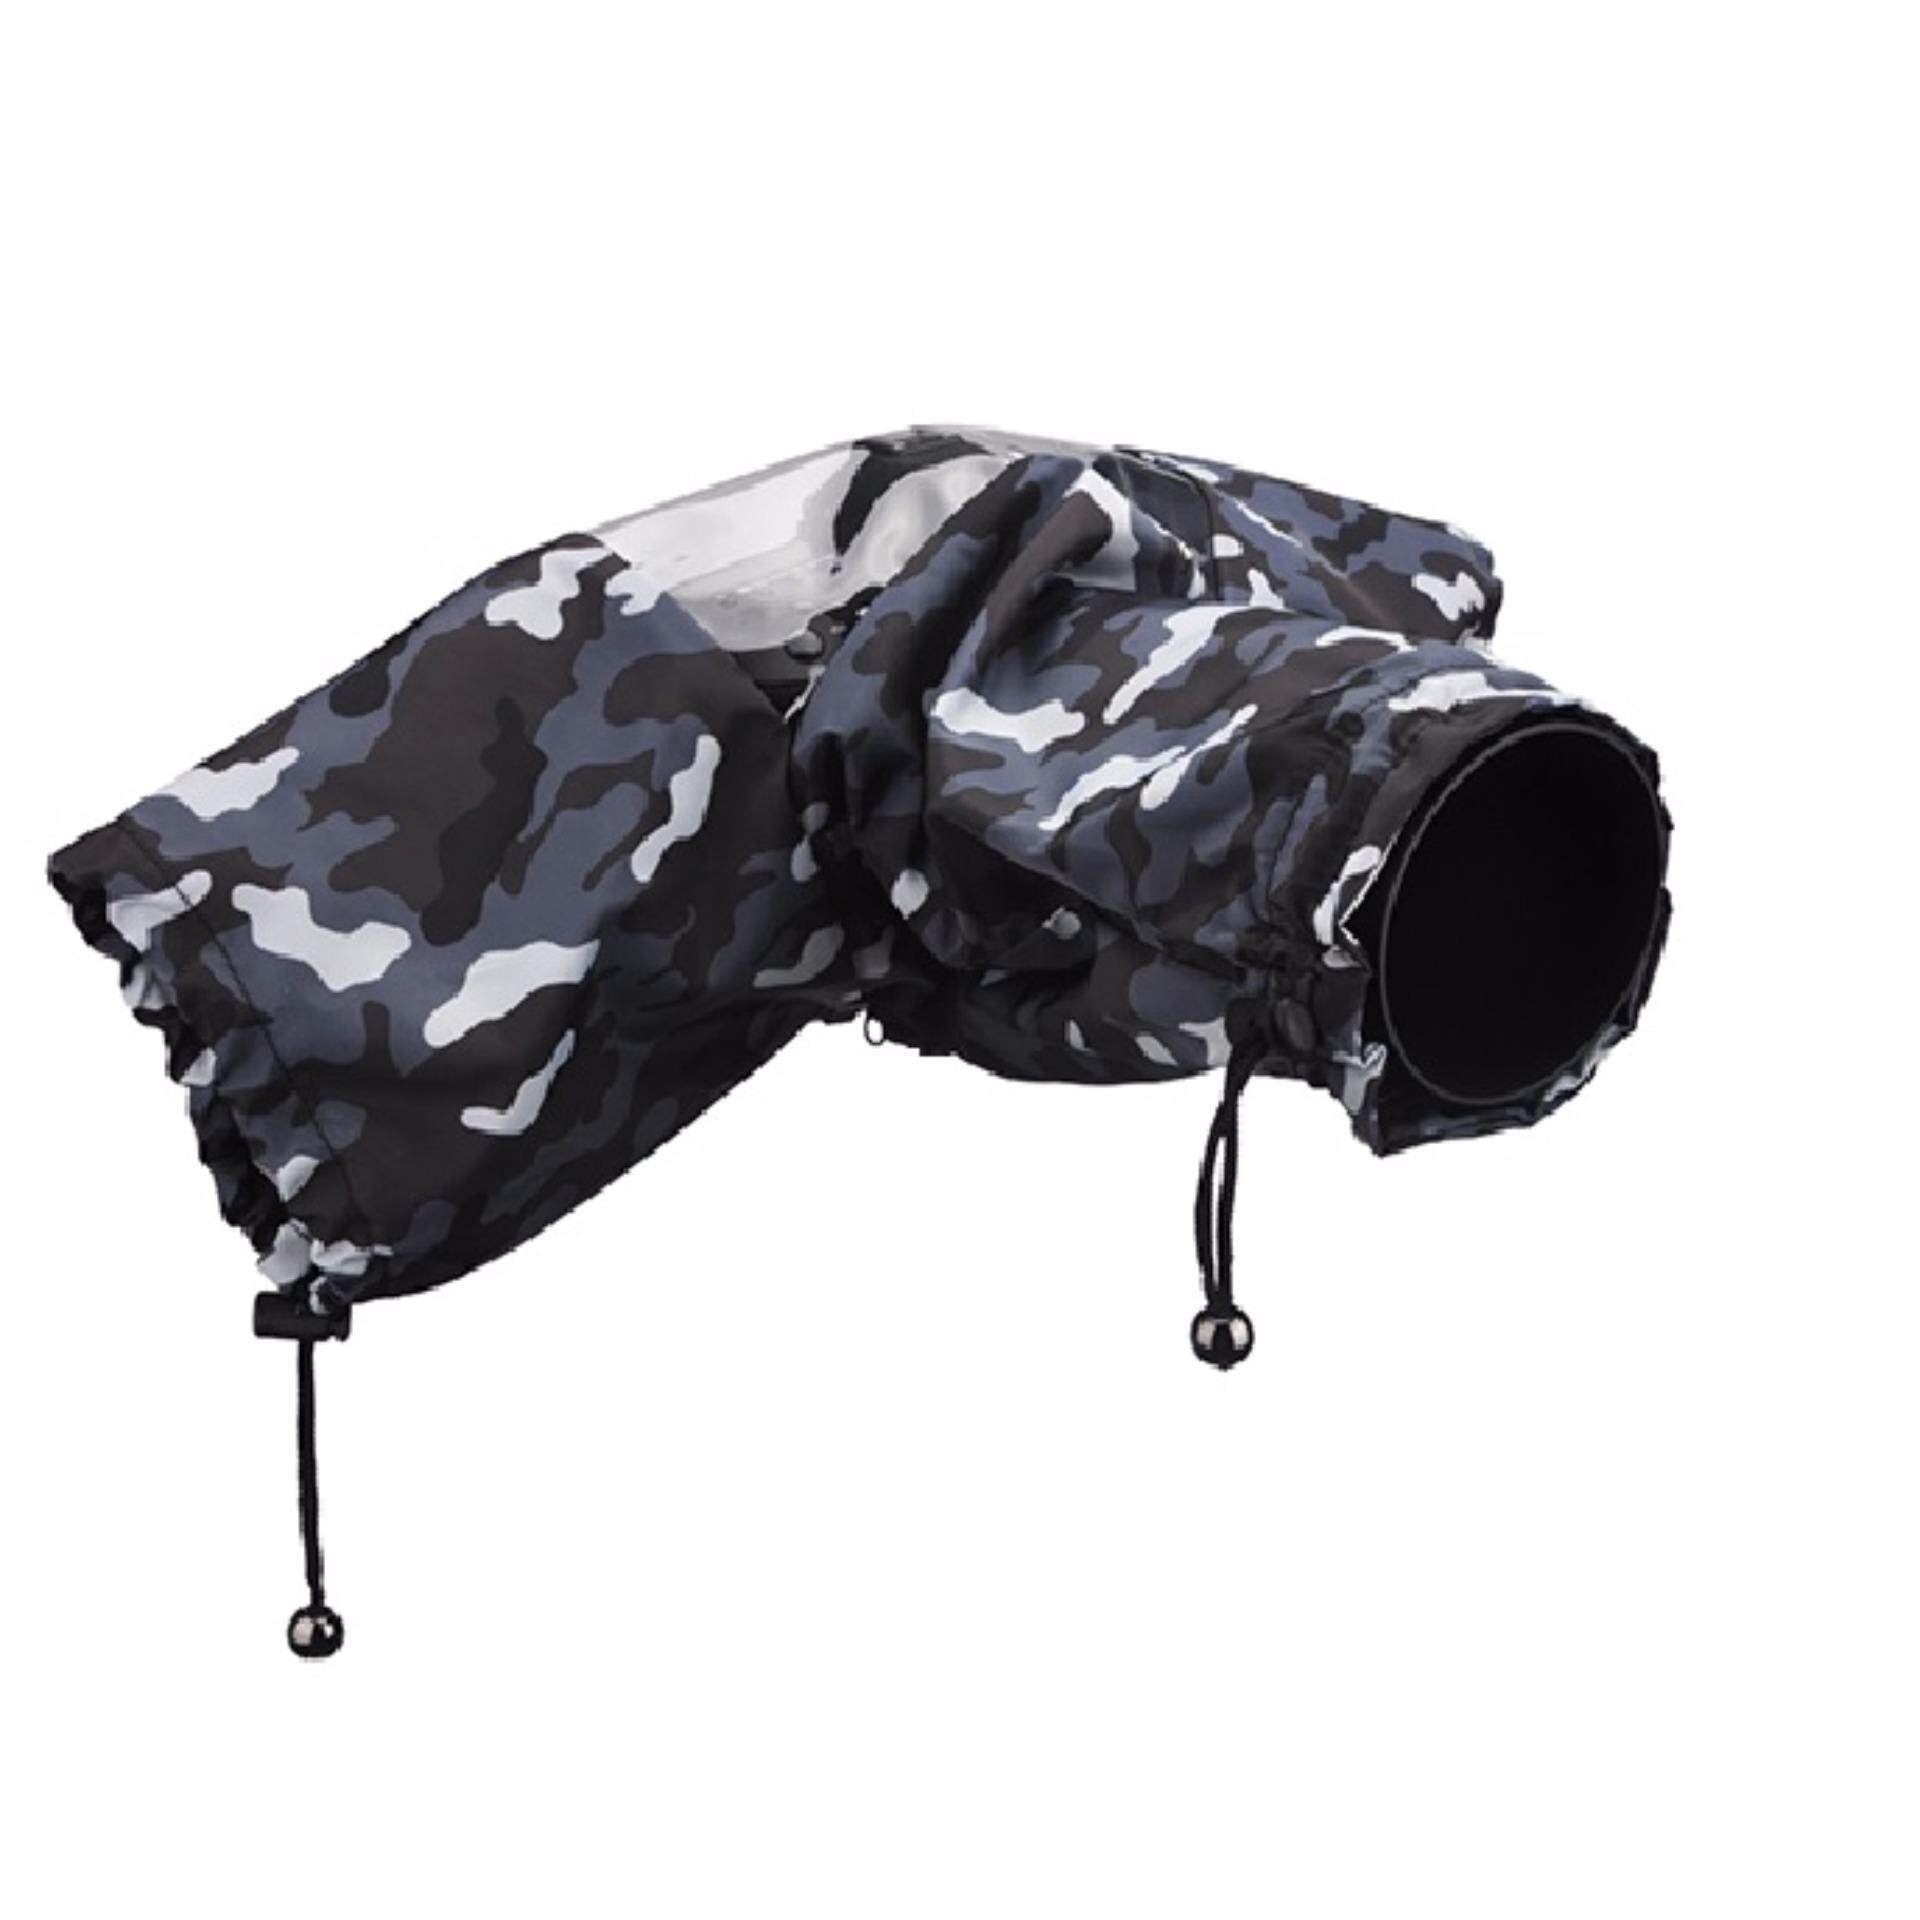 JJC RC-1GR Professional Camouflage Camera Rain Cover Protector for SLR Size